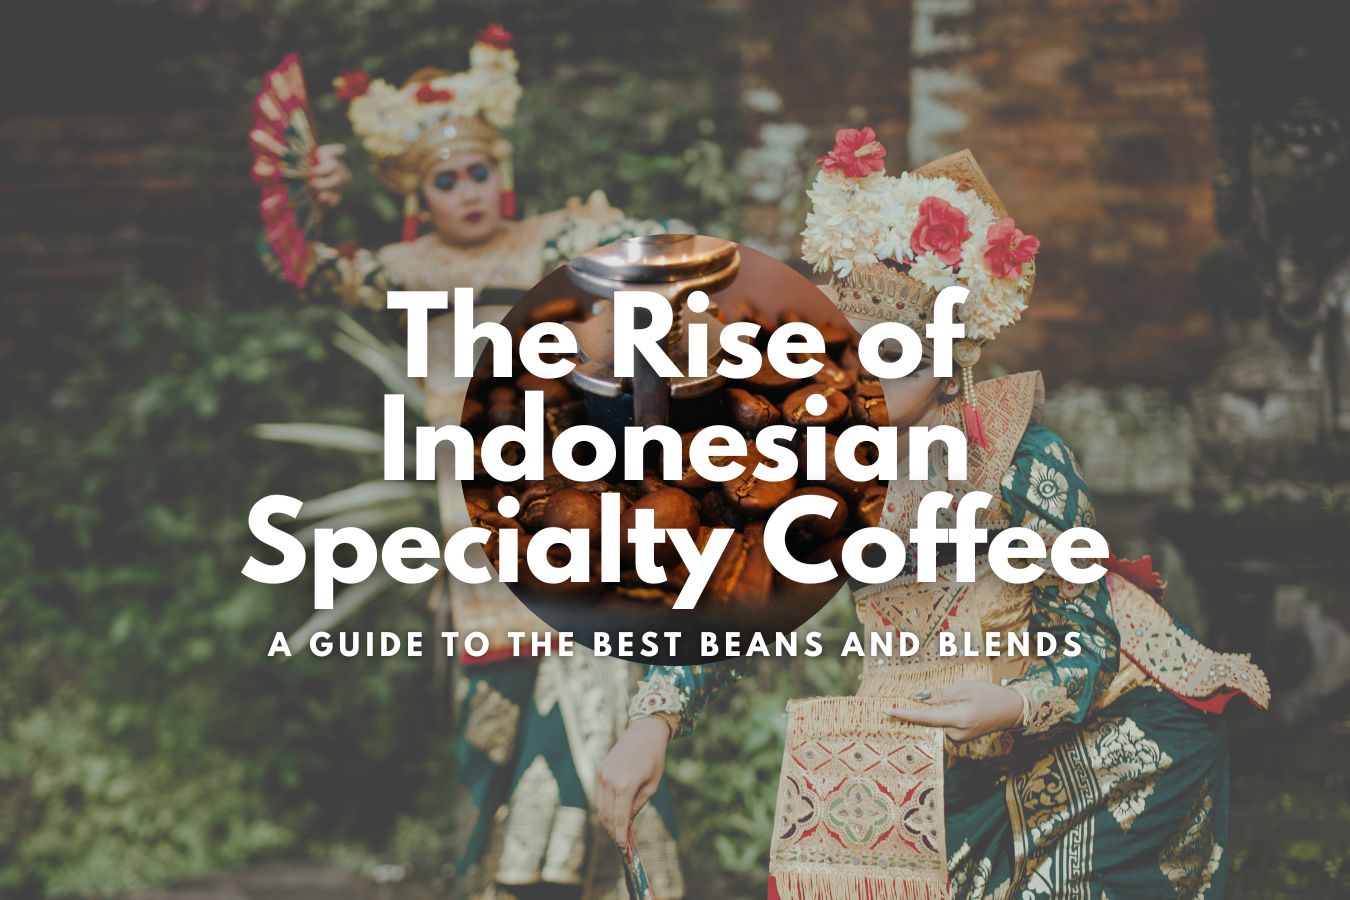 The Rise of Indonesian Specialty Coffee A Guide to the Best Beans and Blends